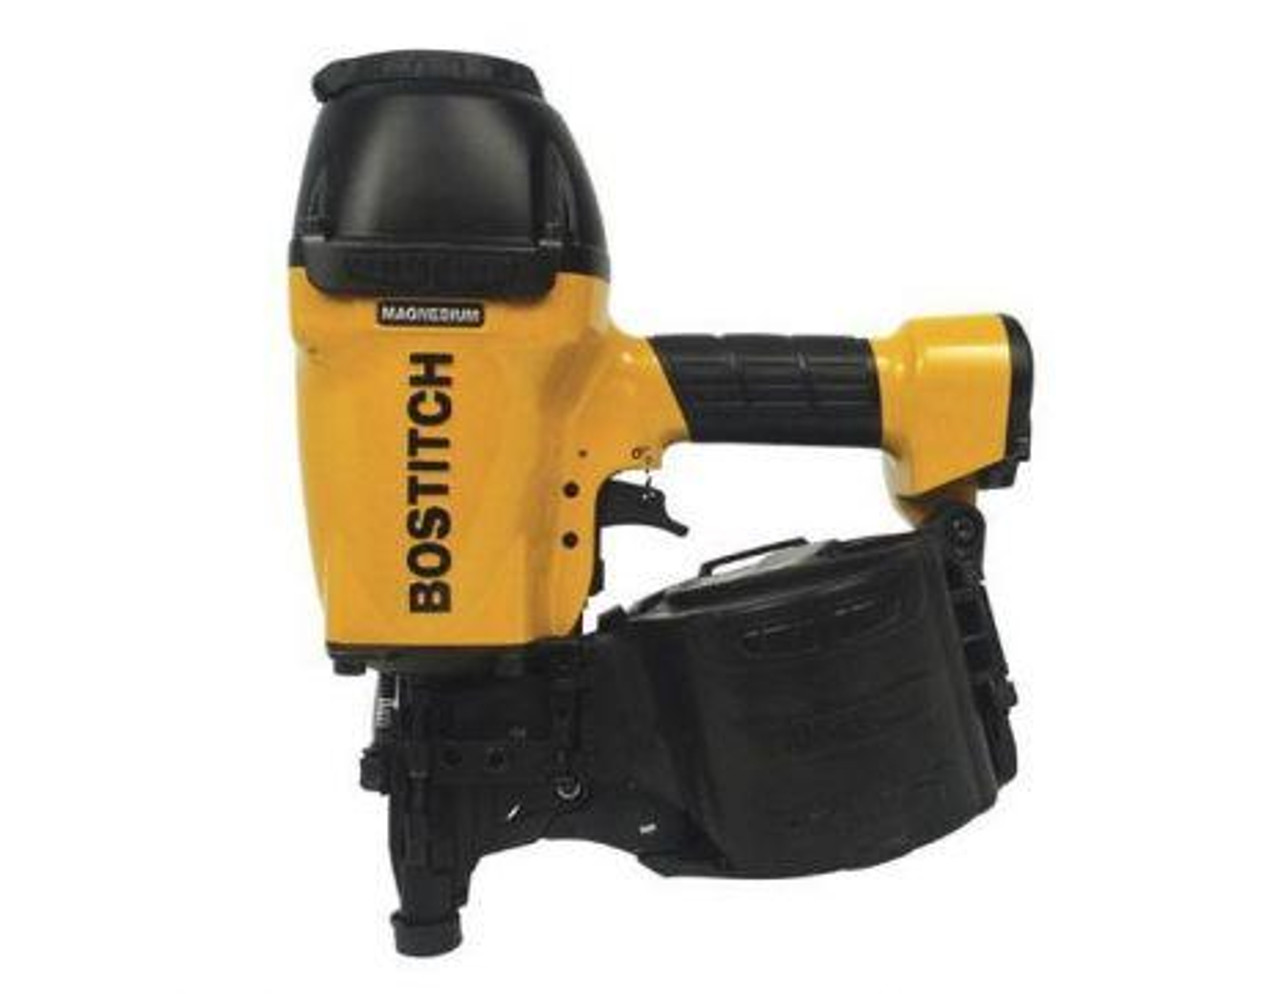 BOSTITCH Coil Framing Nailer 2" to 3-1/2"